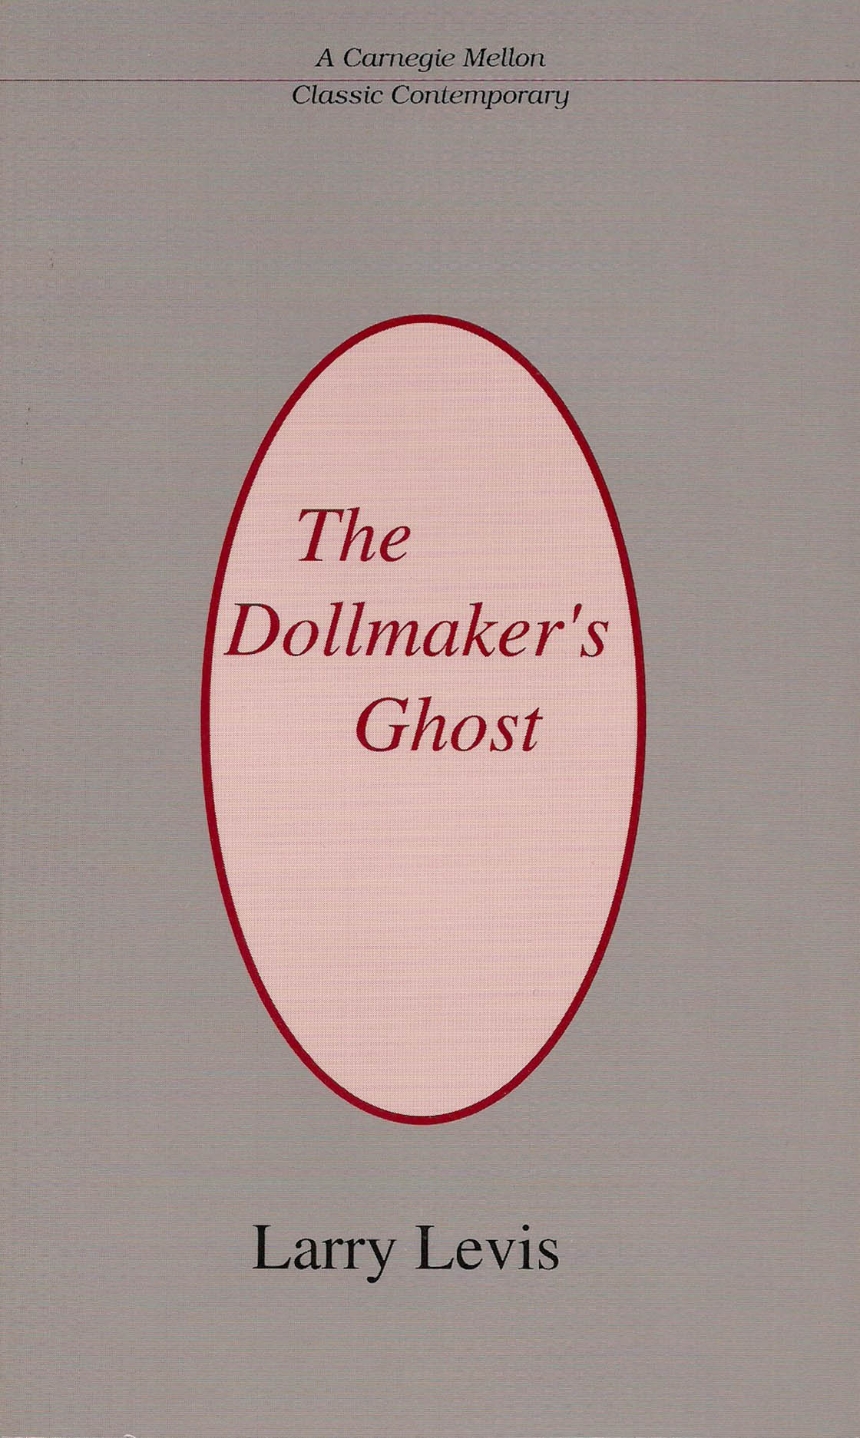 The Dollmaker’s Ghost